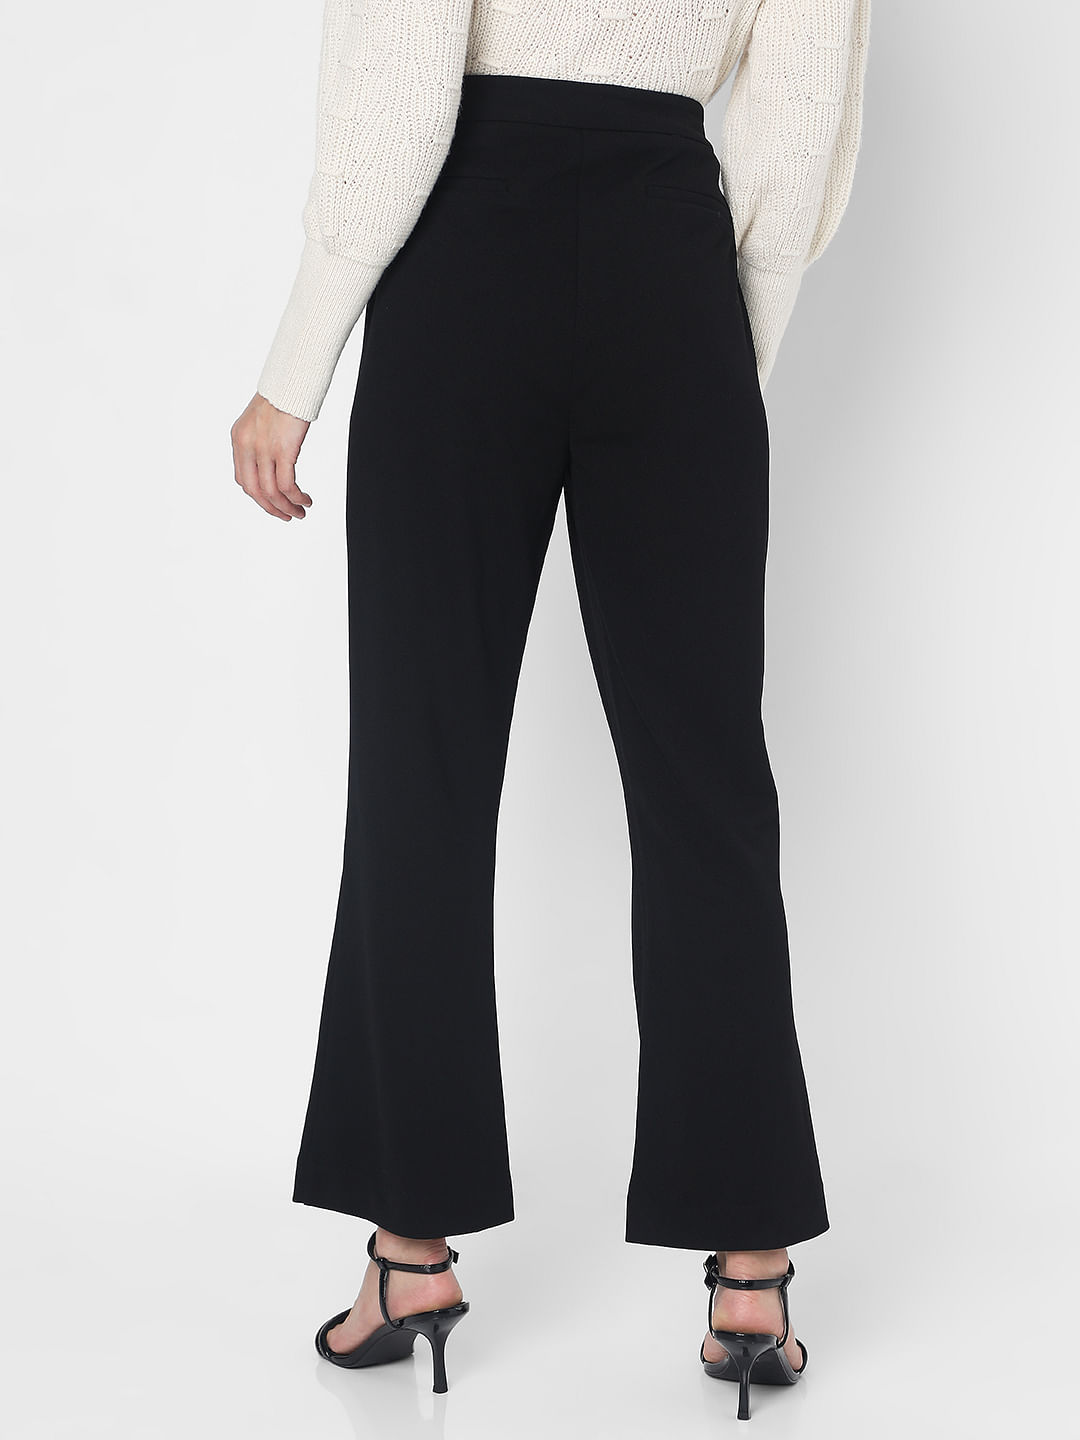 Women's High Waisted Trousers | Explore our New Arrivals | ZARA India